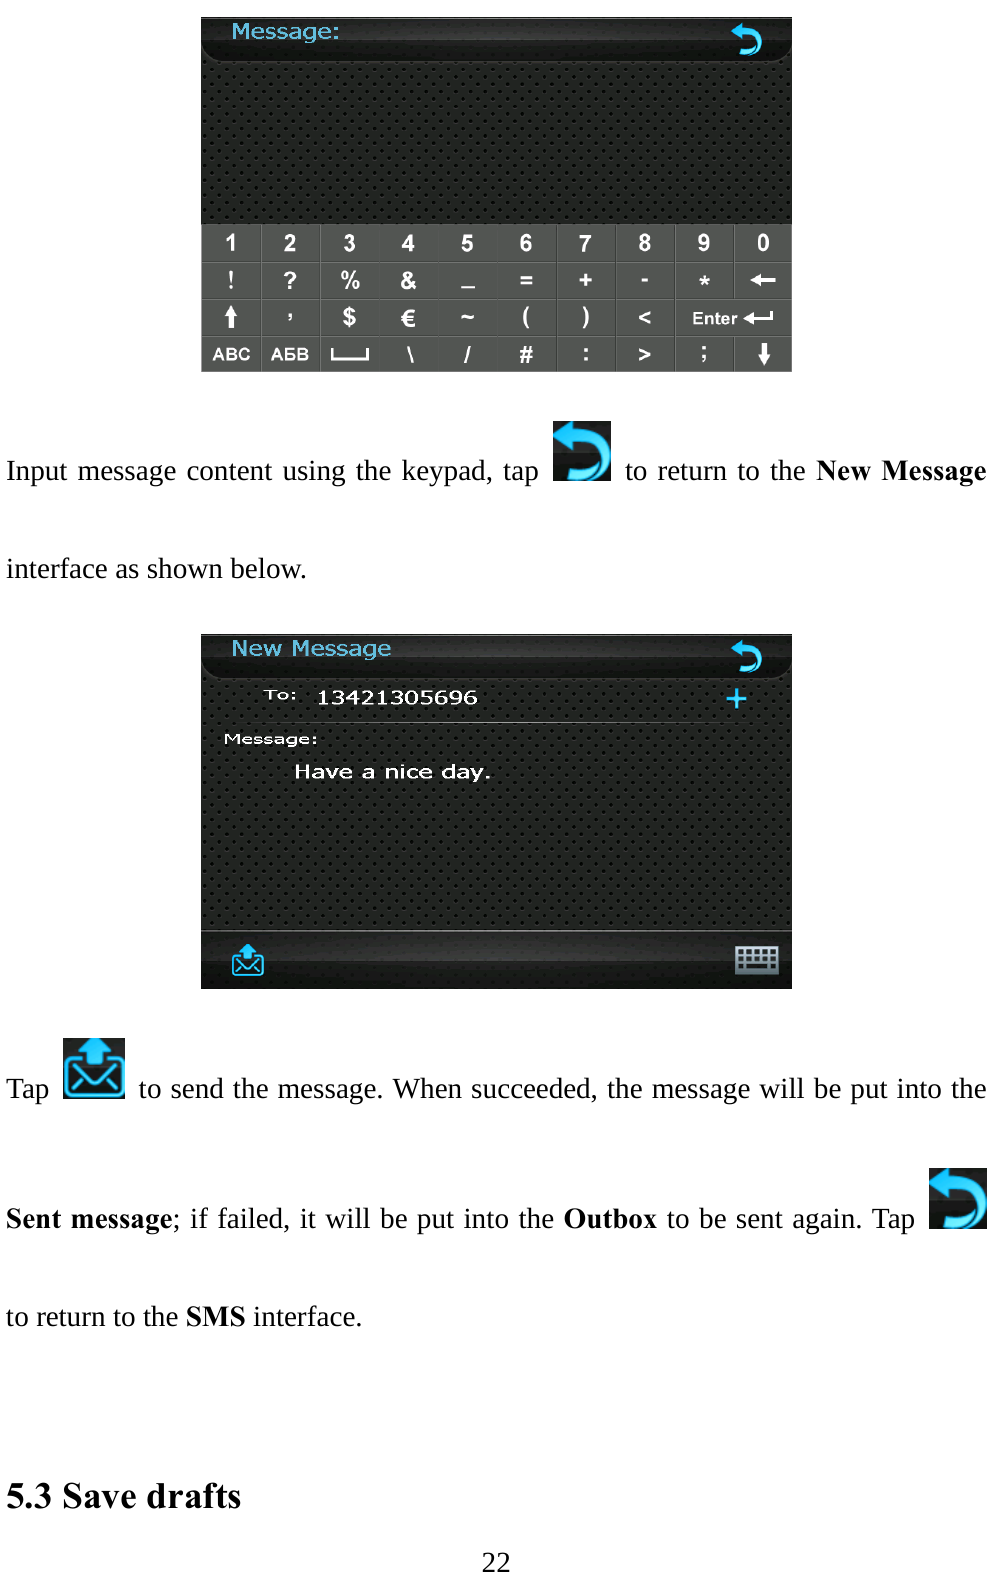  22  Input message content using the keypad, tap    to return to the New Message interface as shown below.  Tap    to send the message. When succeeded, the message will be put into the Sent message; if failed, it will be put into the Outbox to be sent again. Tap   to return to the SMS interface.   5.3 Save drafts 